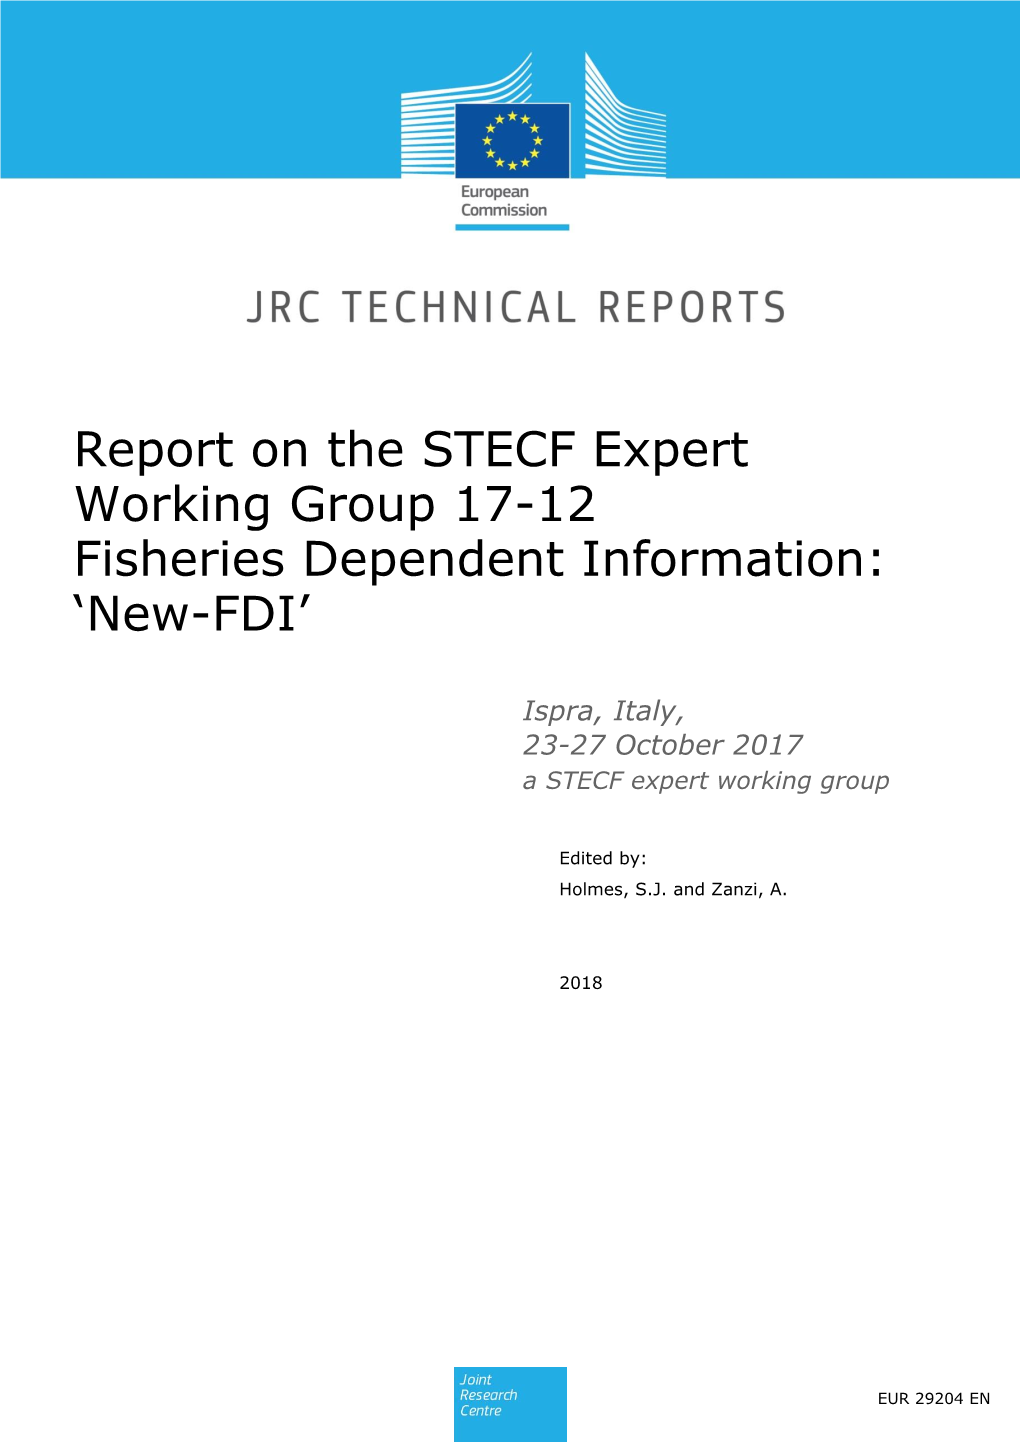 Report on the STECF Expert Working Group 17-12 Fisheries Dependent Information: ‘New-FDI’